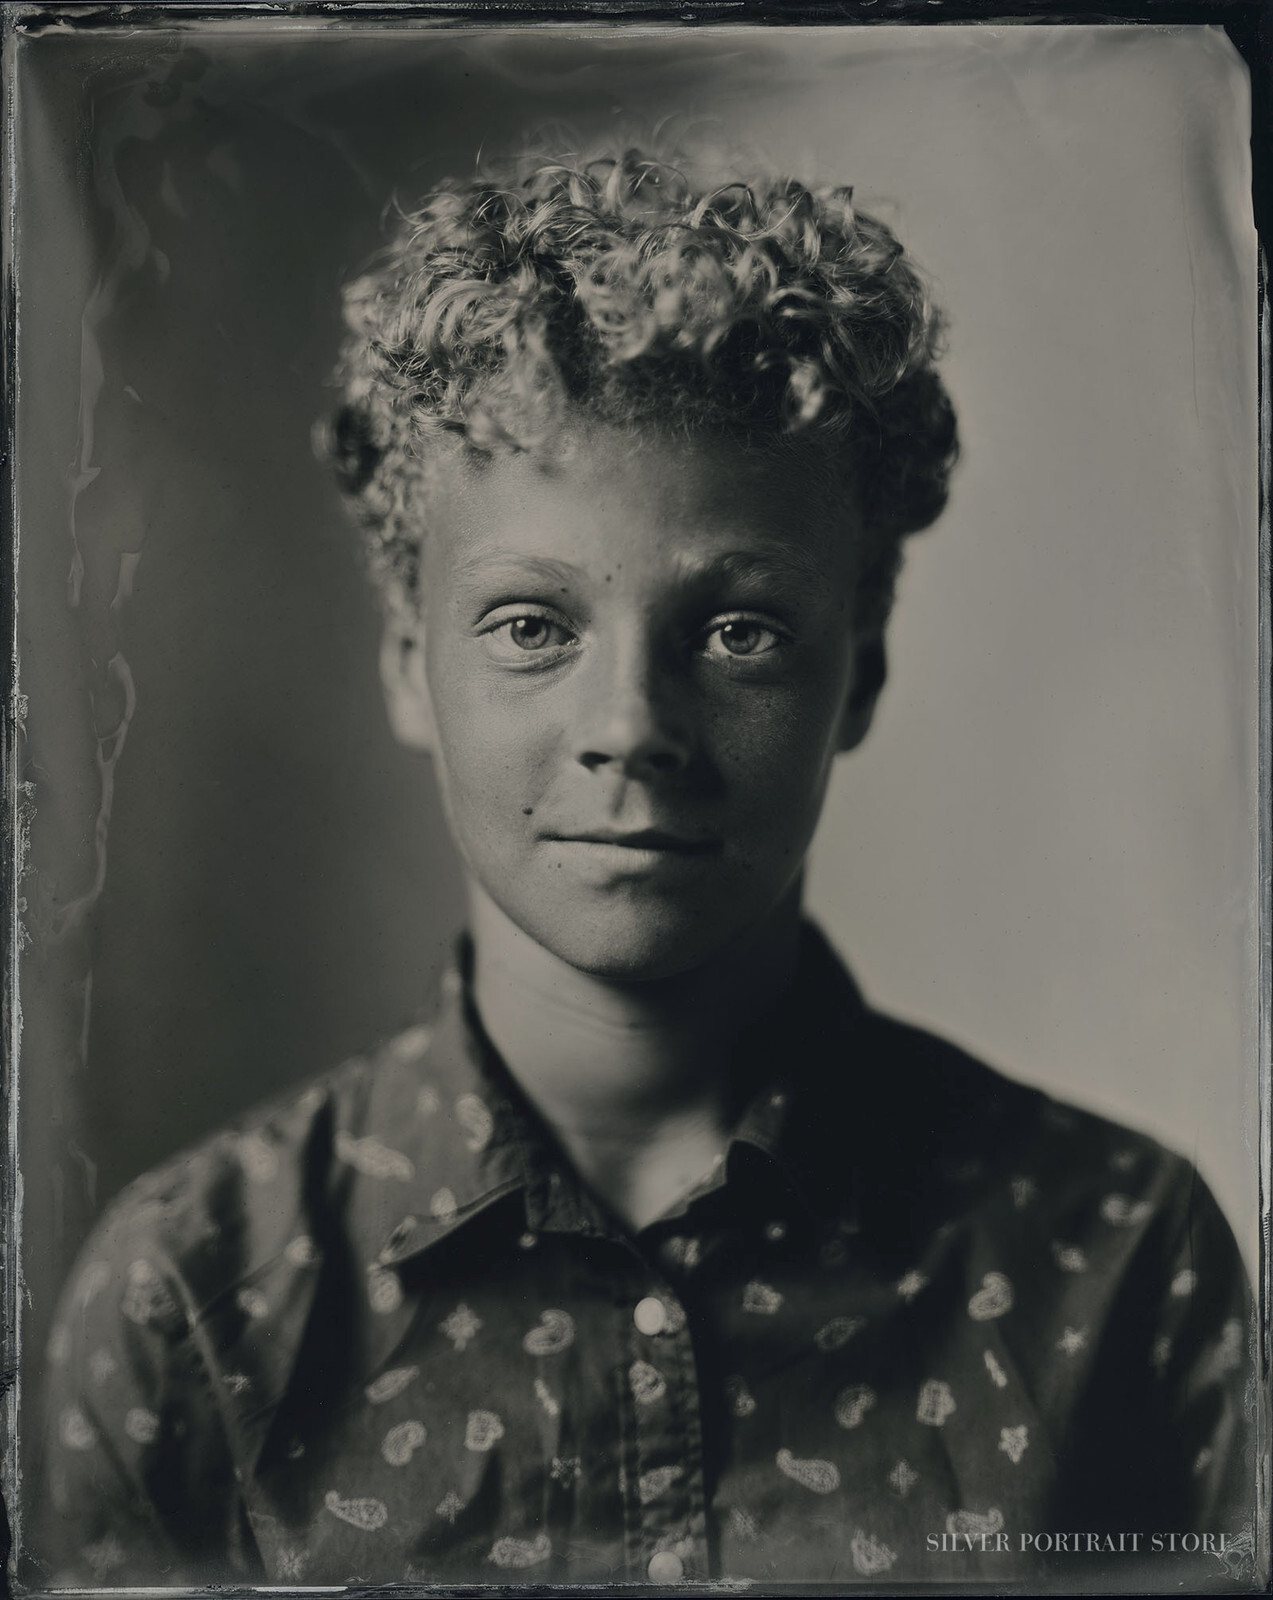 Ohle-Silver Portrait Store-Scan from Wet plate collodion-Tintype 20 x 25 cm